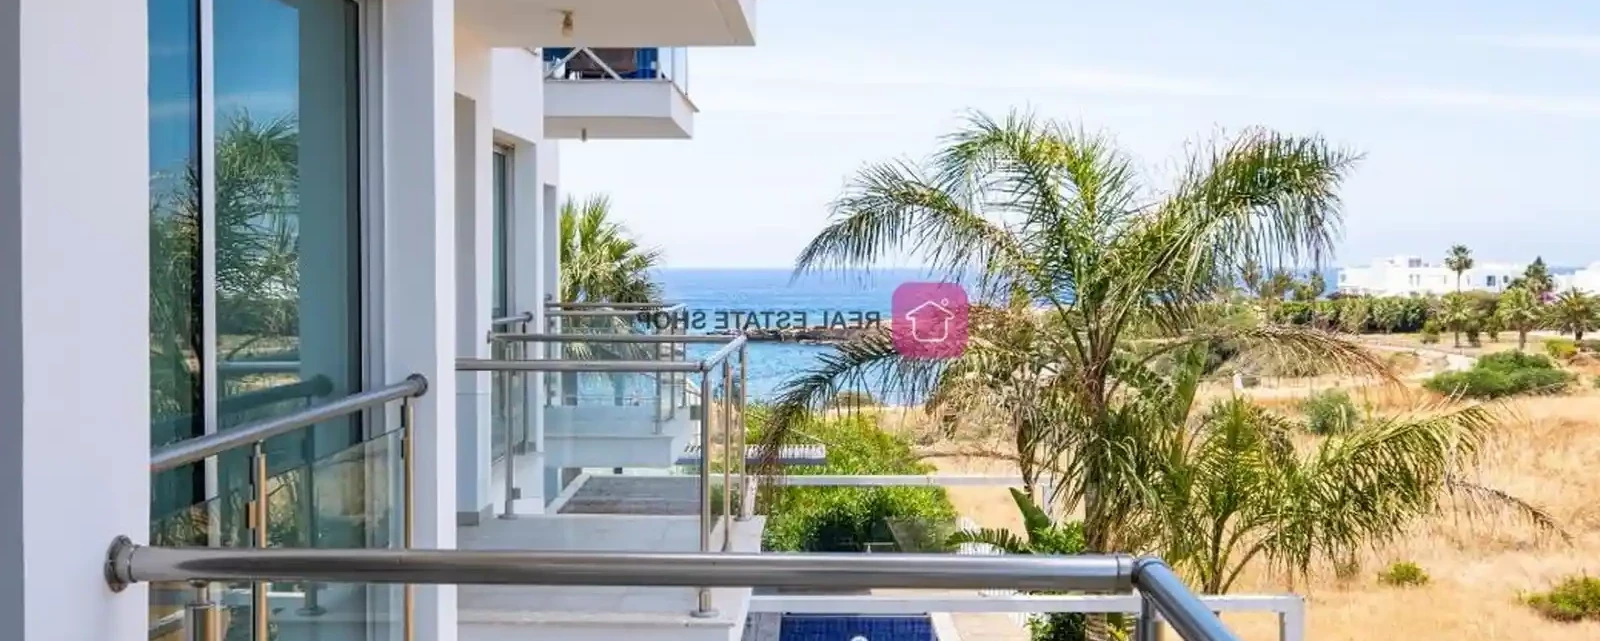 1-bedroom apartment fоr sаle €185.000, image 1